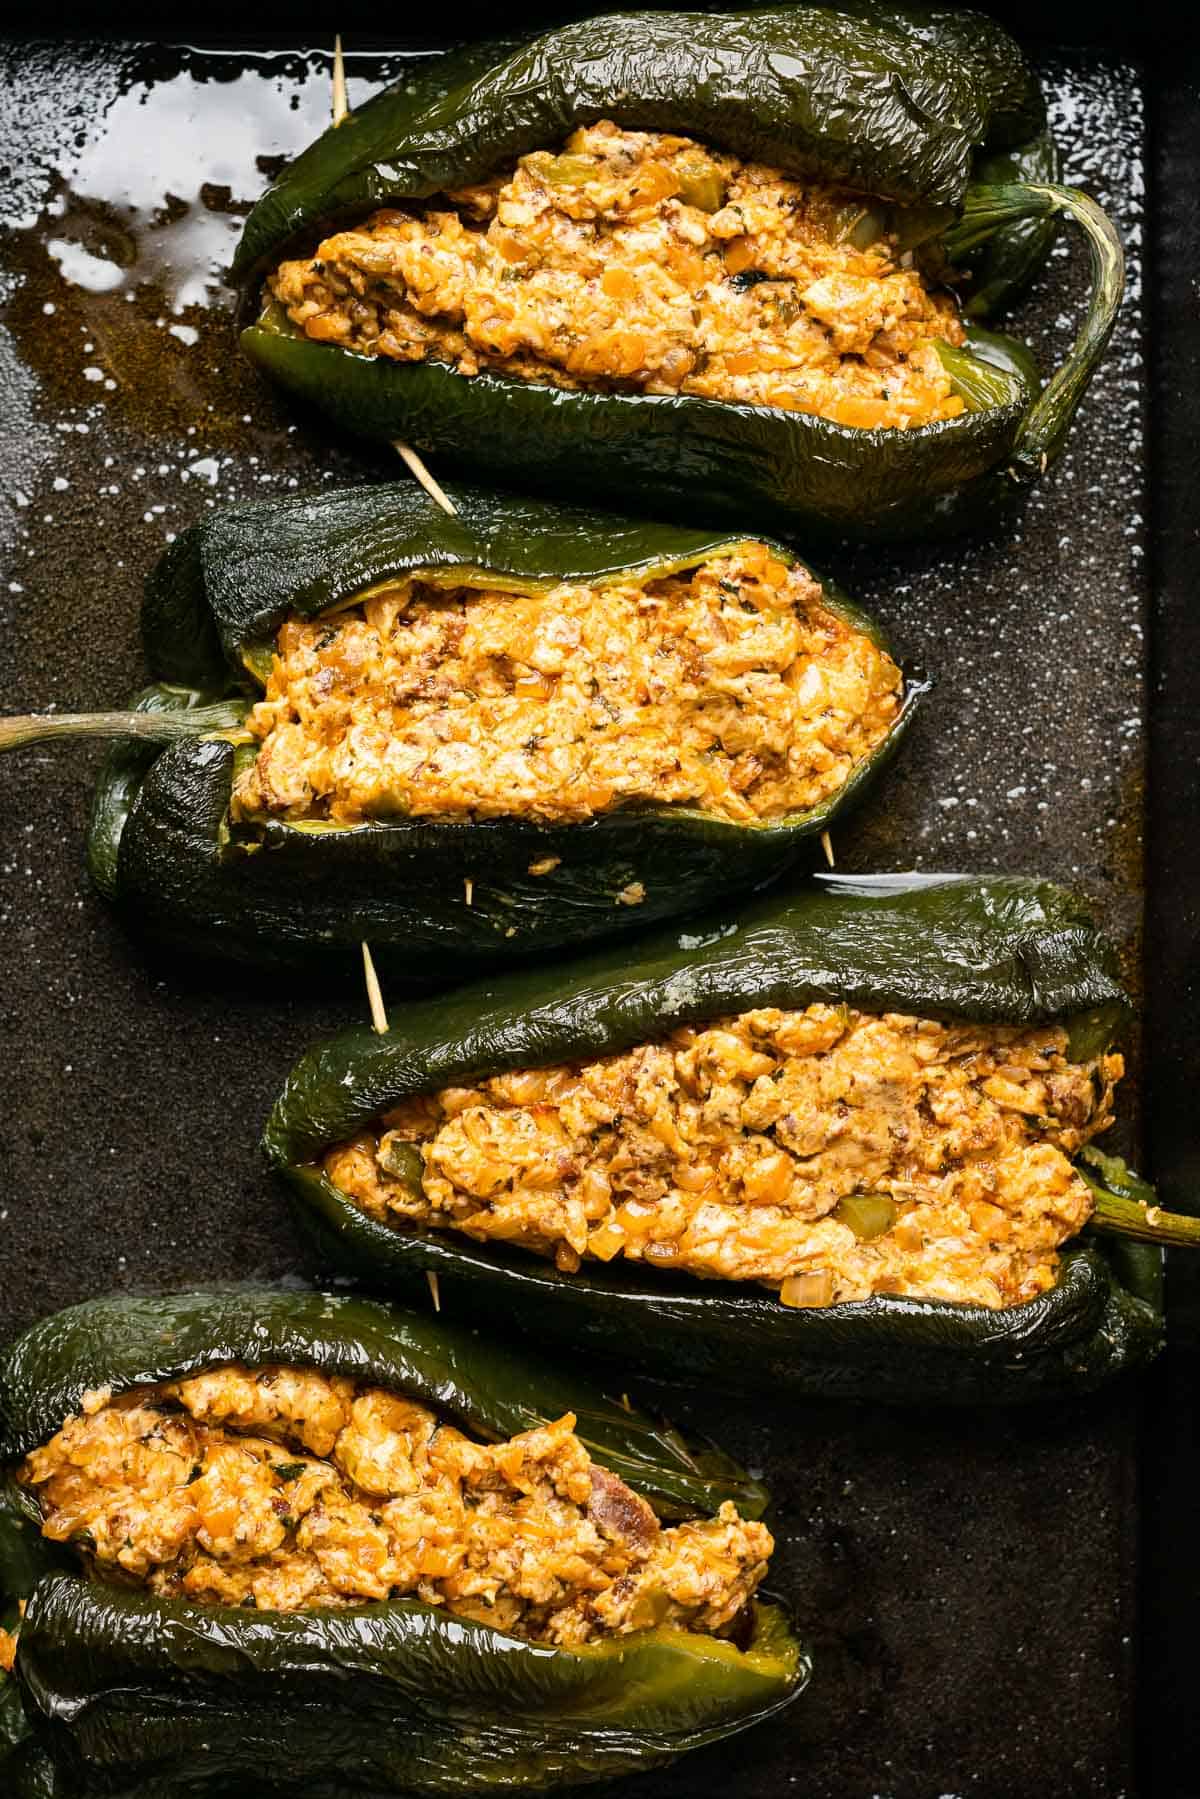 poblano peppers stuffed with cheesy chorizo sour cream mixture and secured with toothpicks